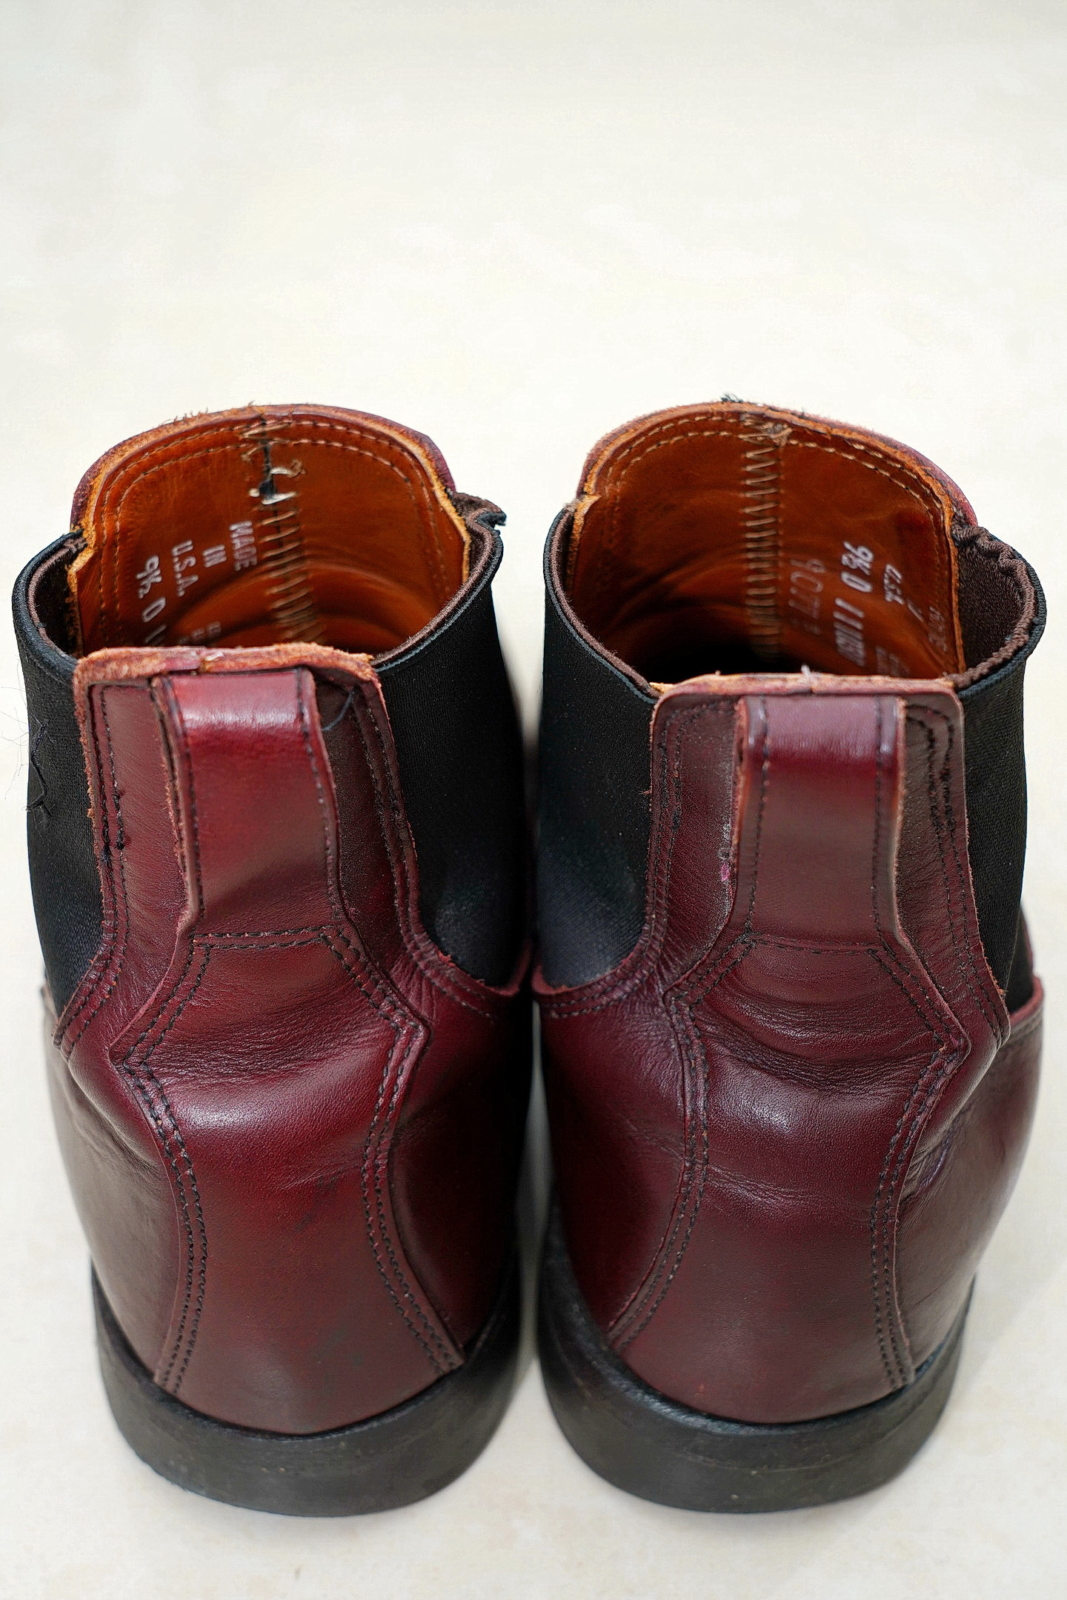 Red Wing 9077，靴筒背面